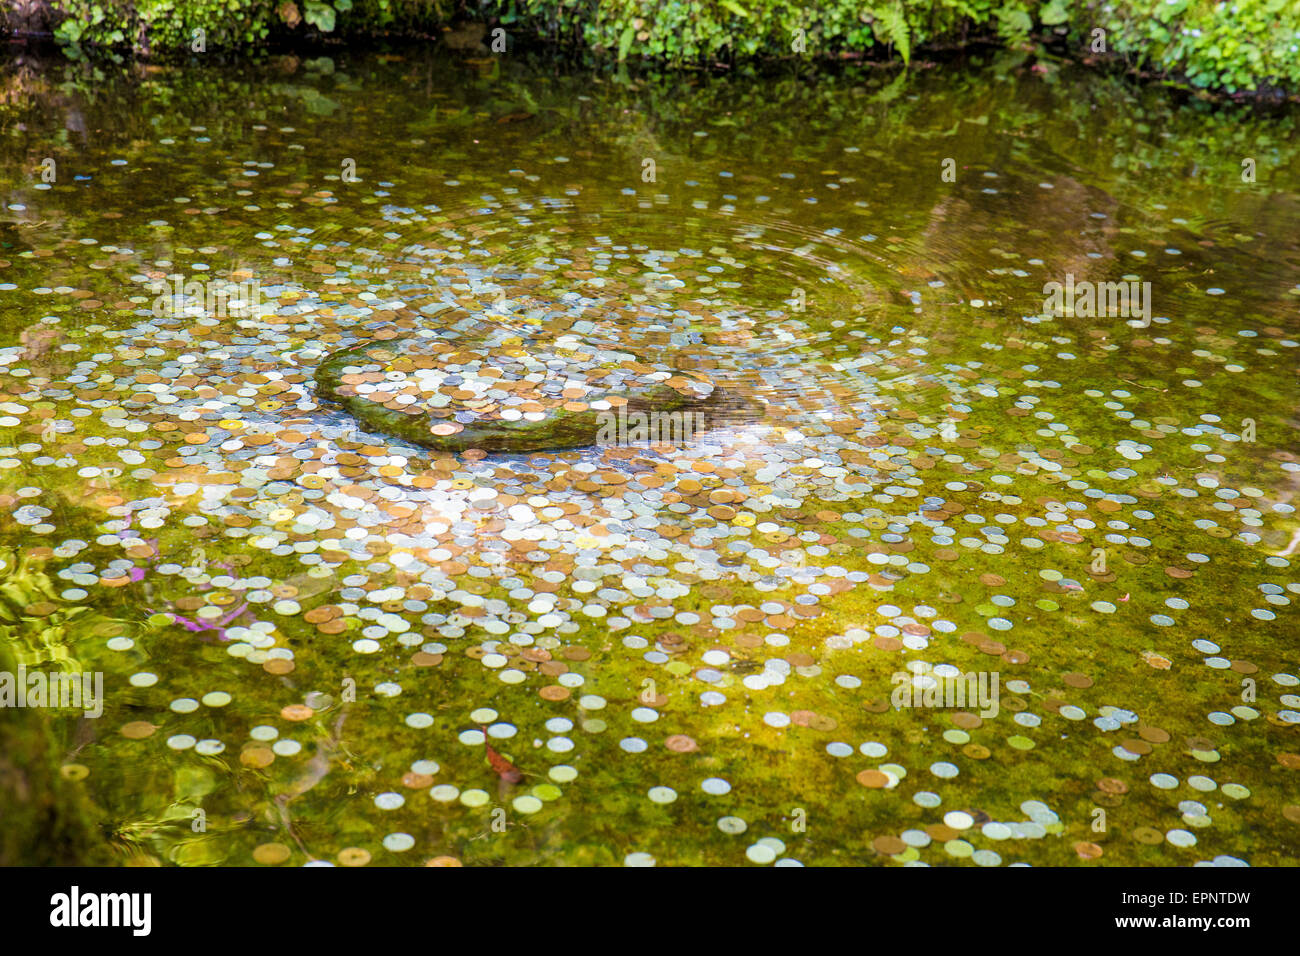 Coins in water for good luck and making a wish Stock Photo